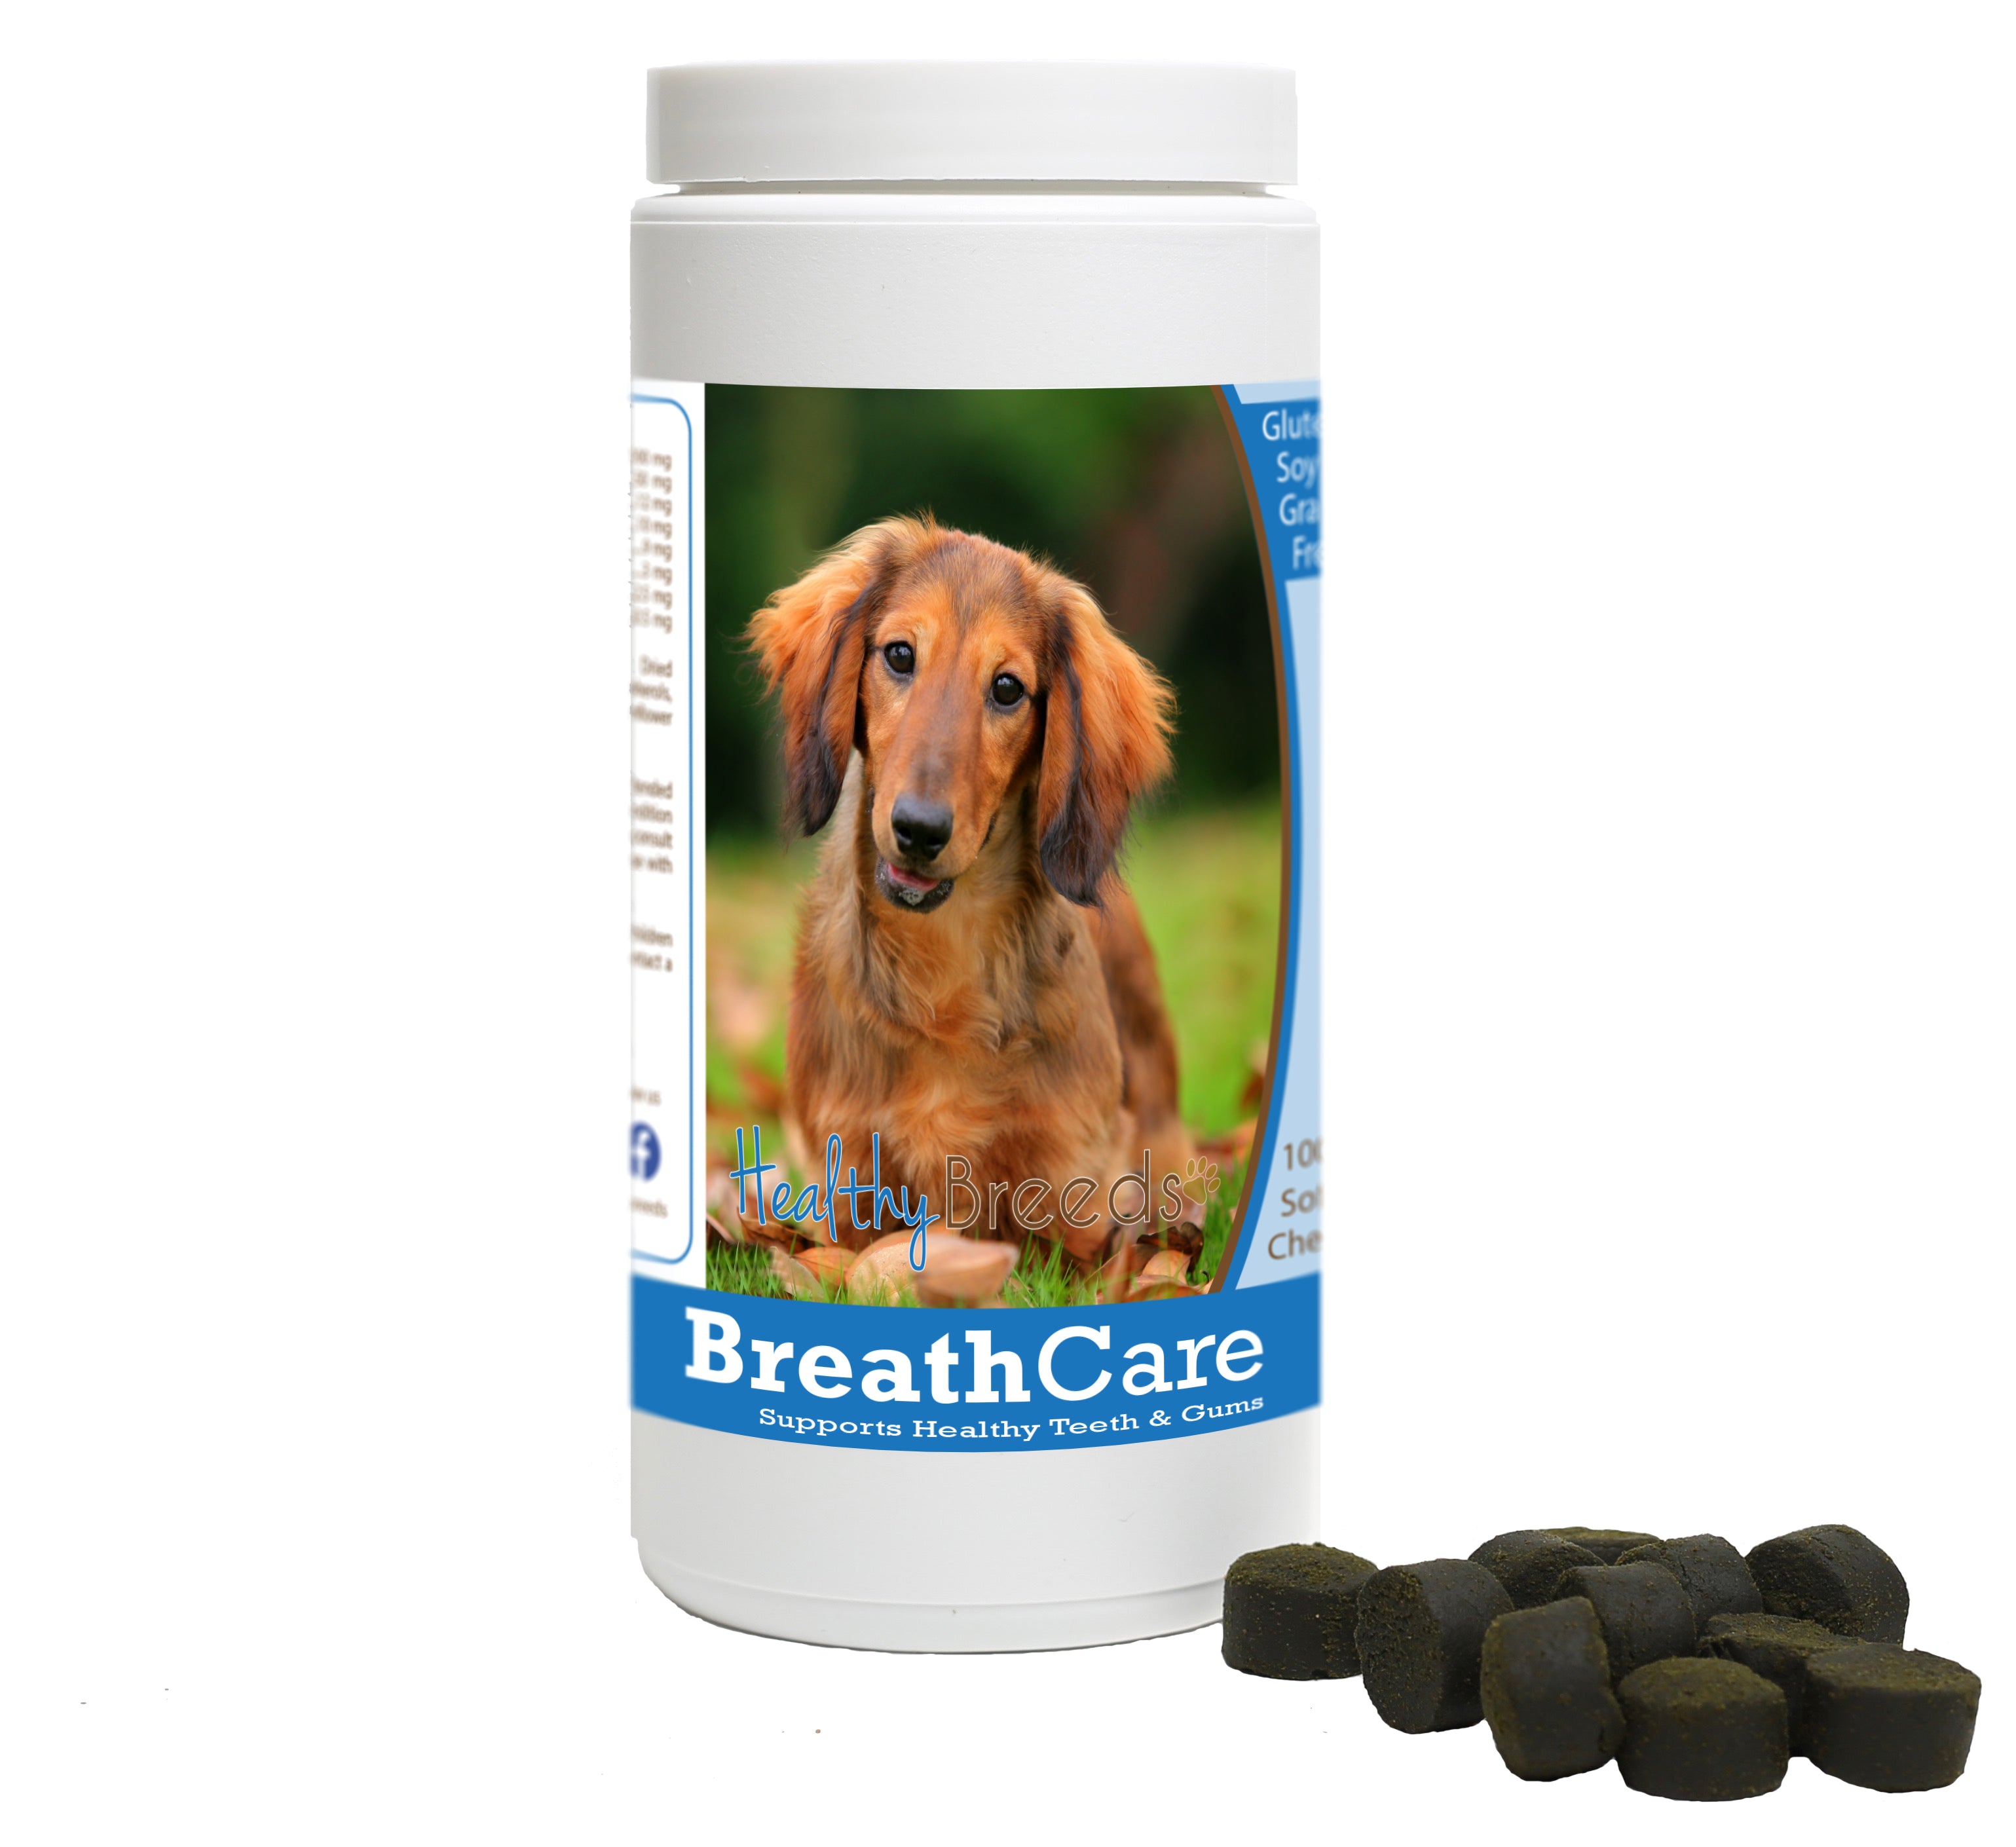 Dachshund Breath Care Soft Chews for Dogs 60 Count